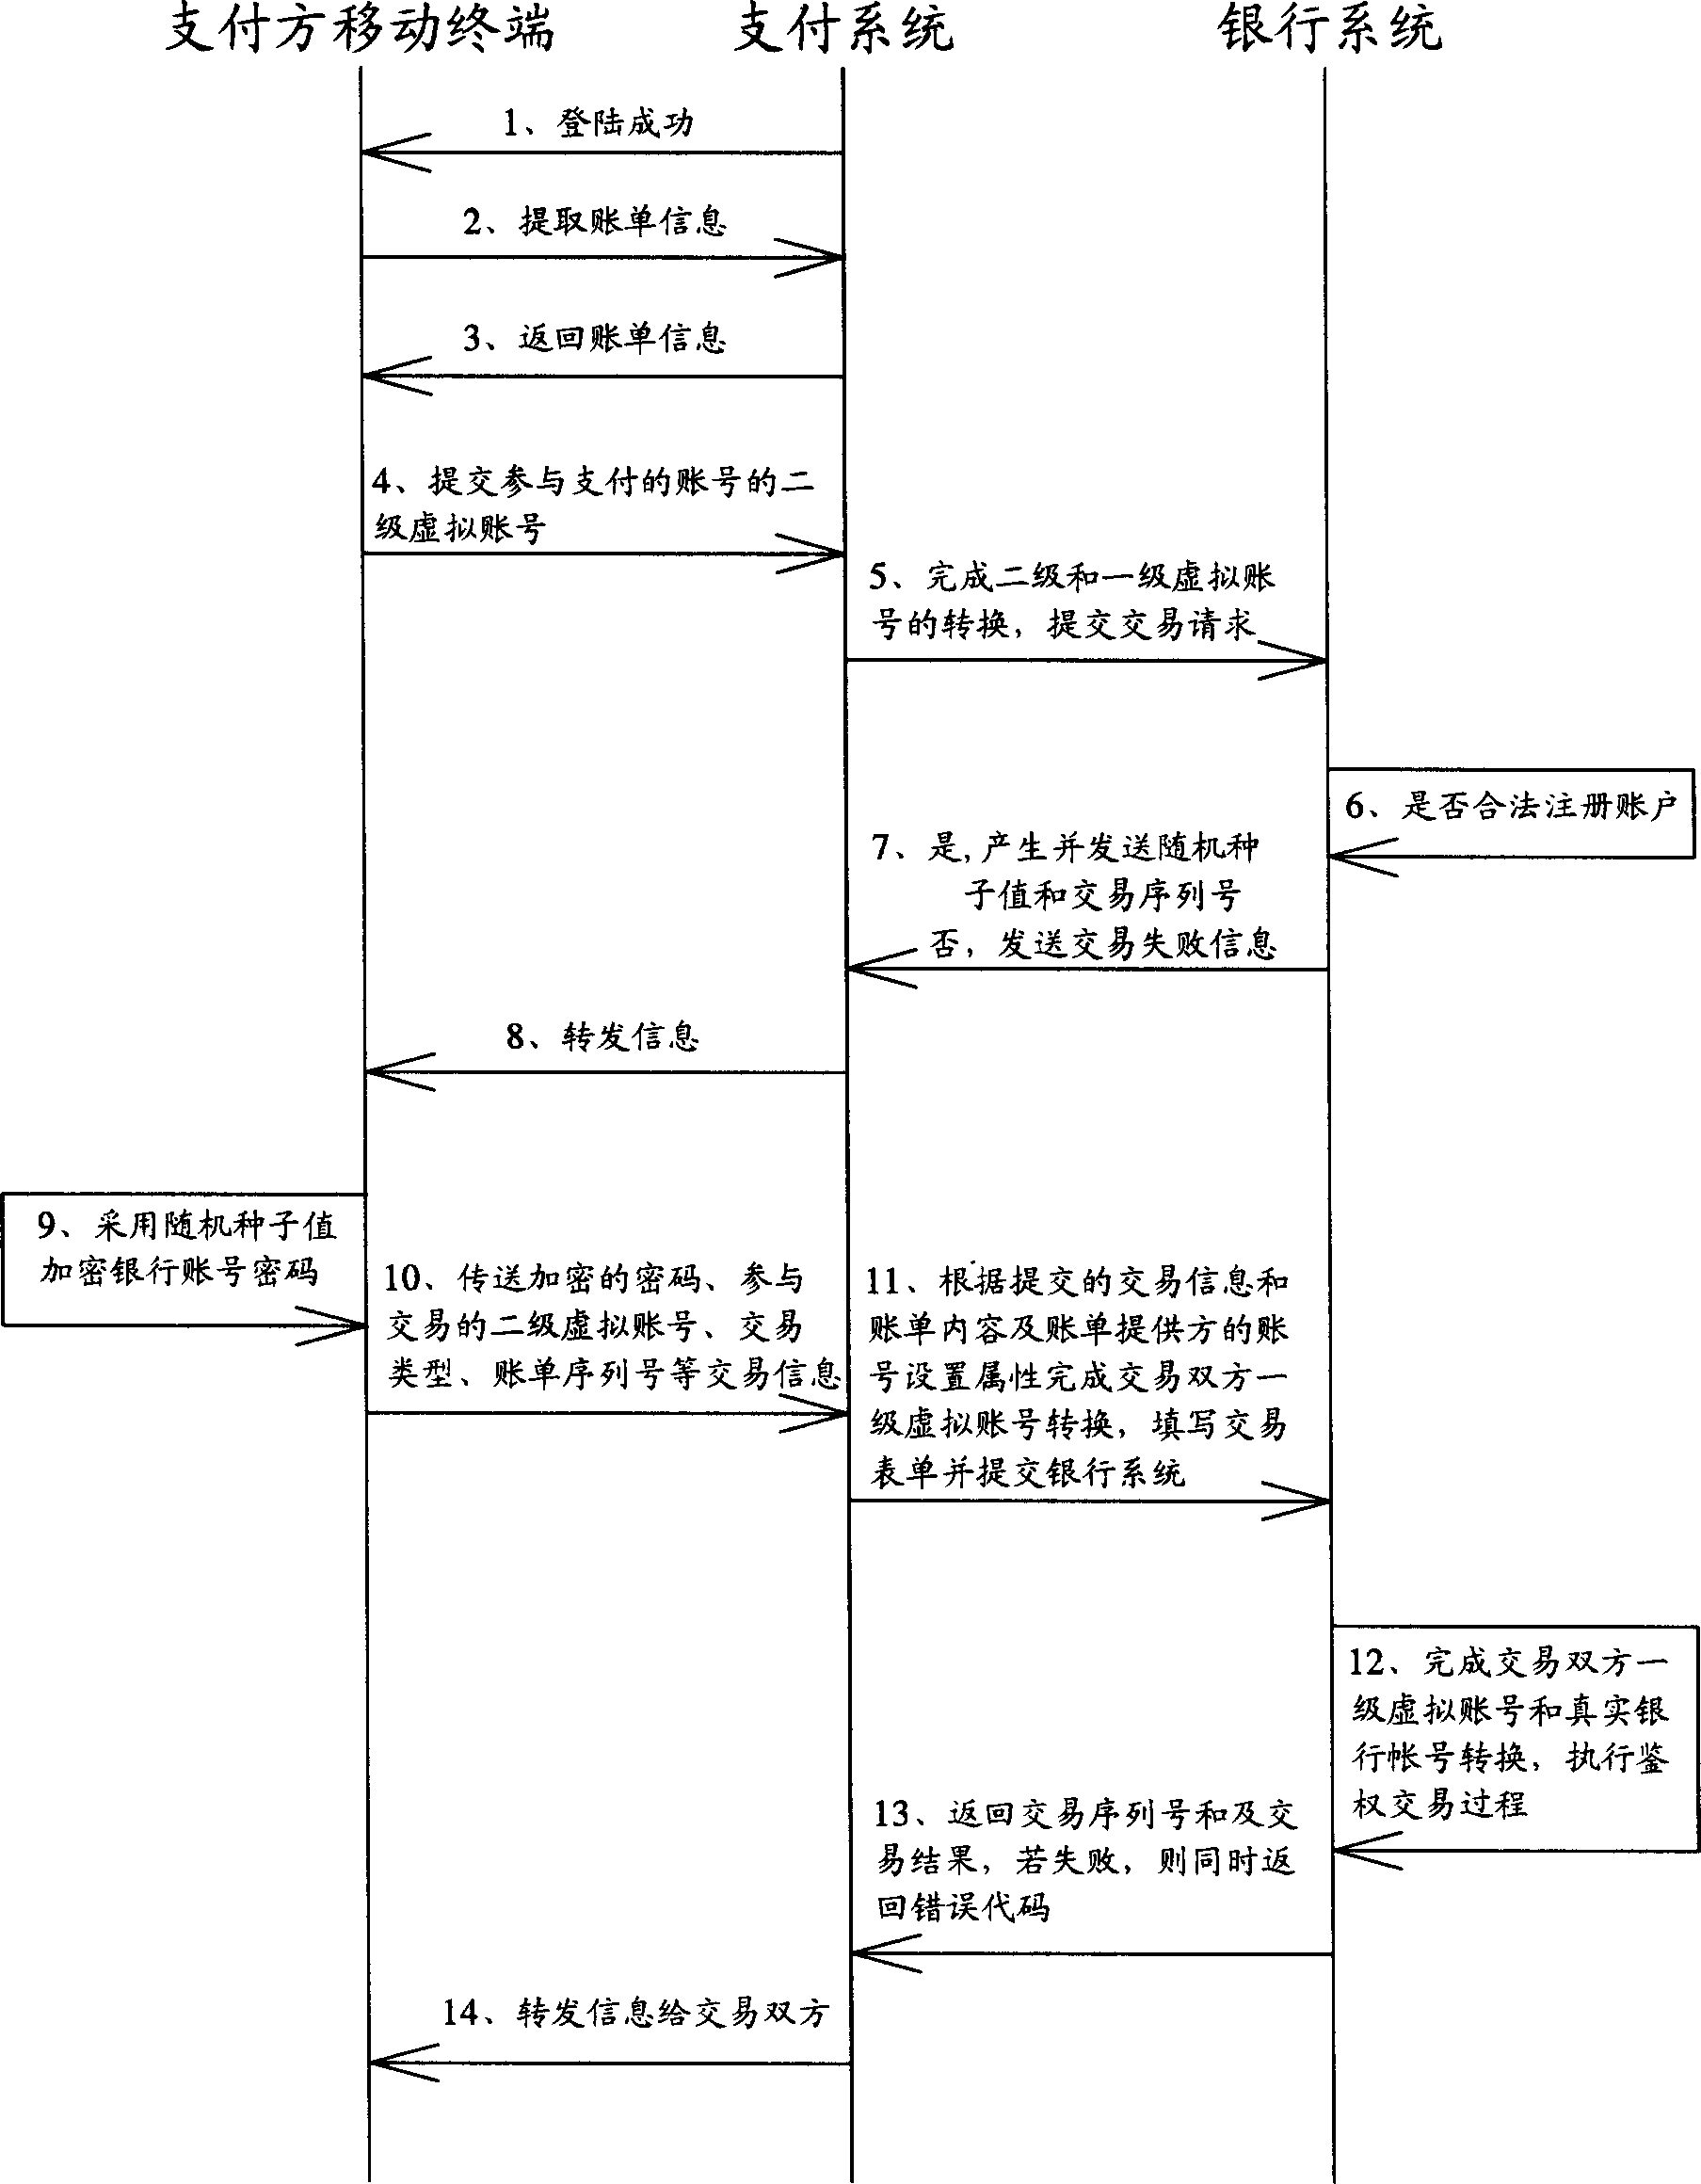 Mobile-terminal-based general transaction method and its system